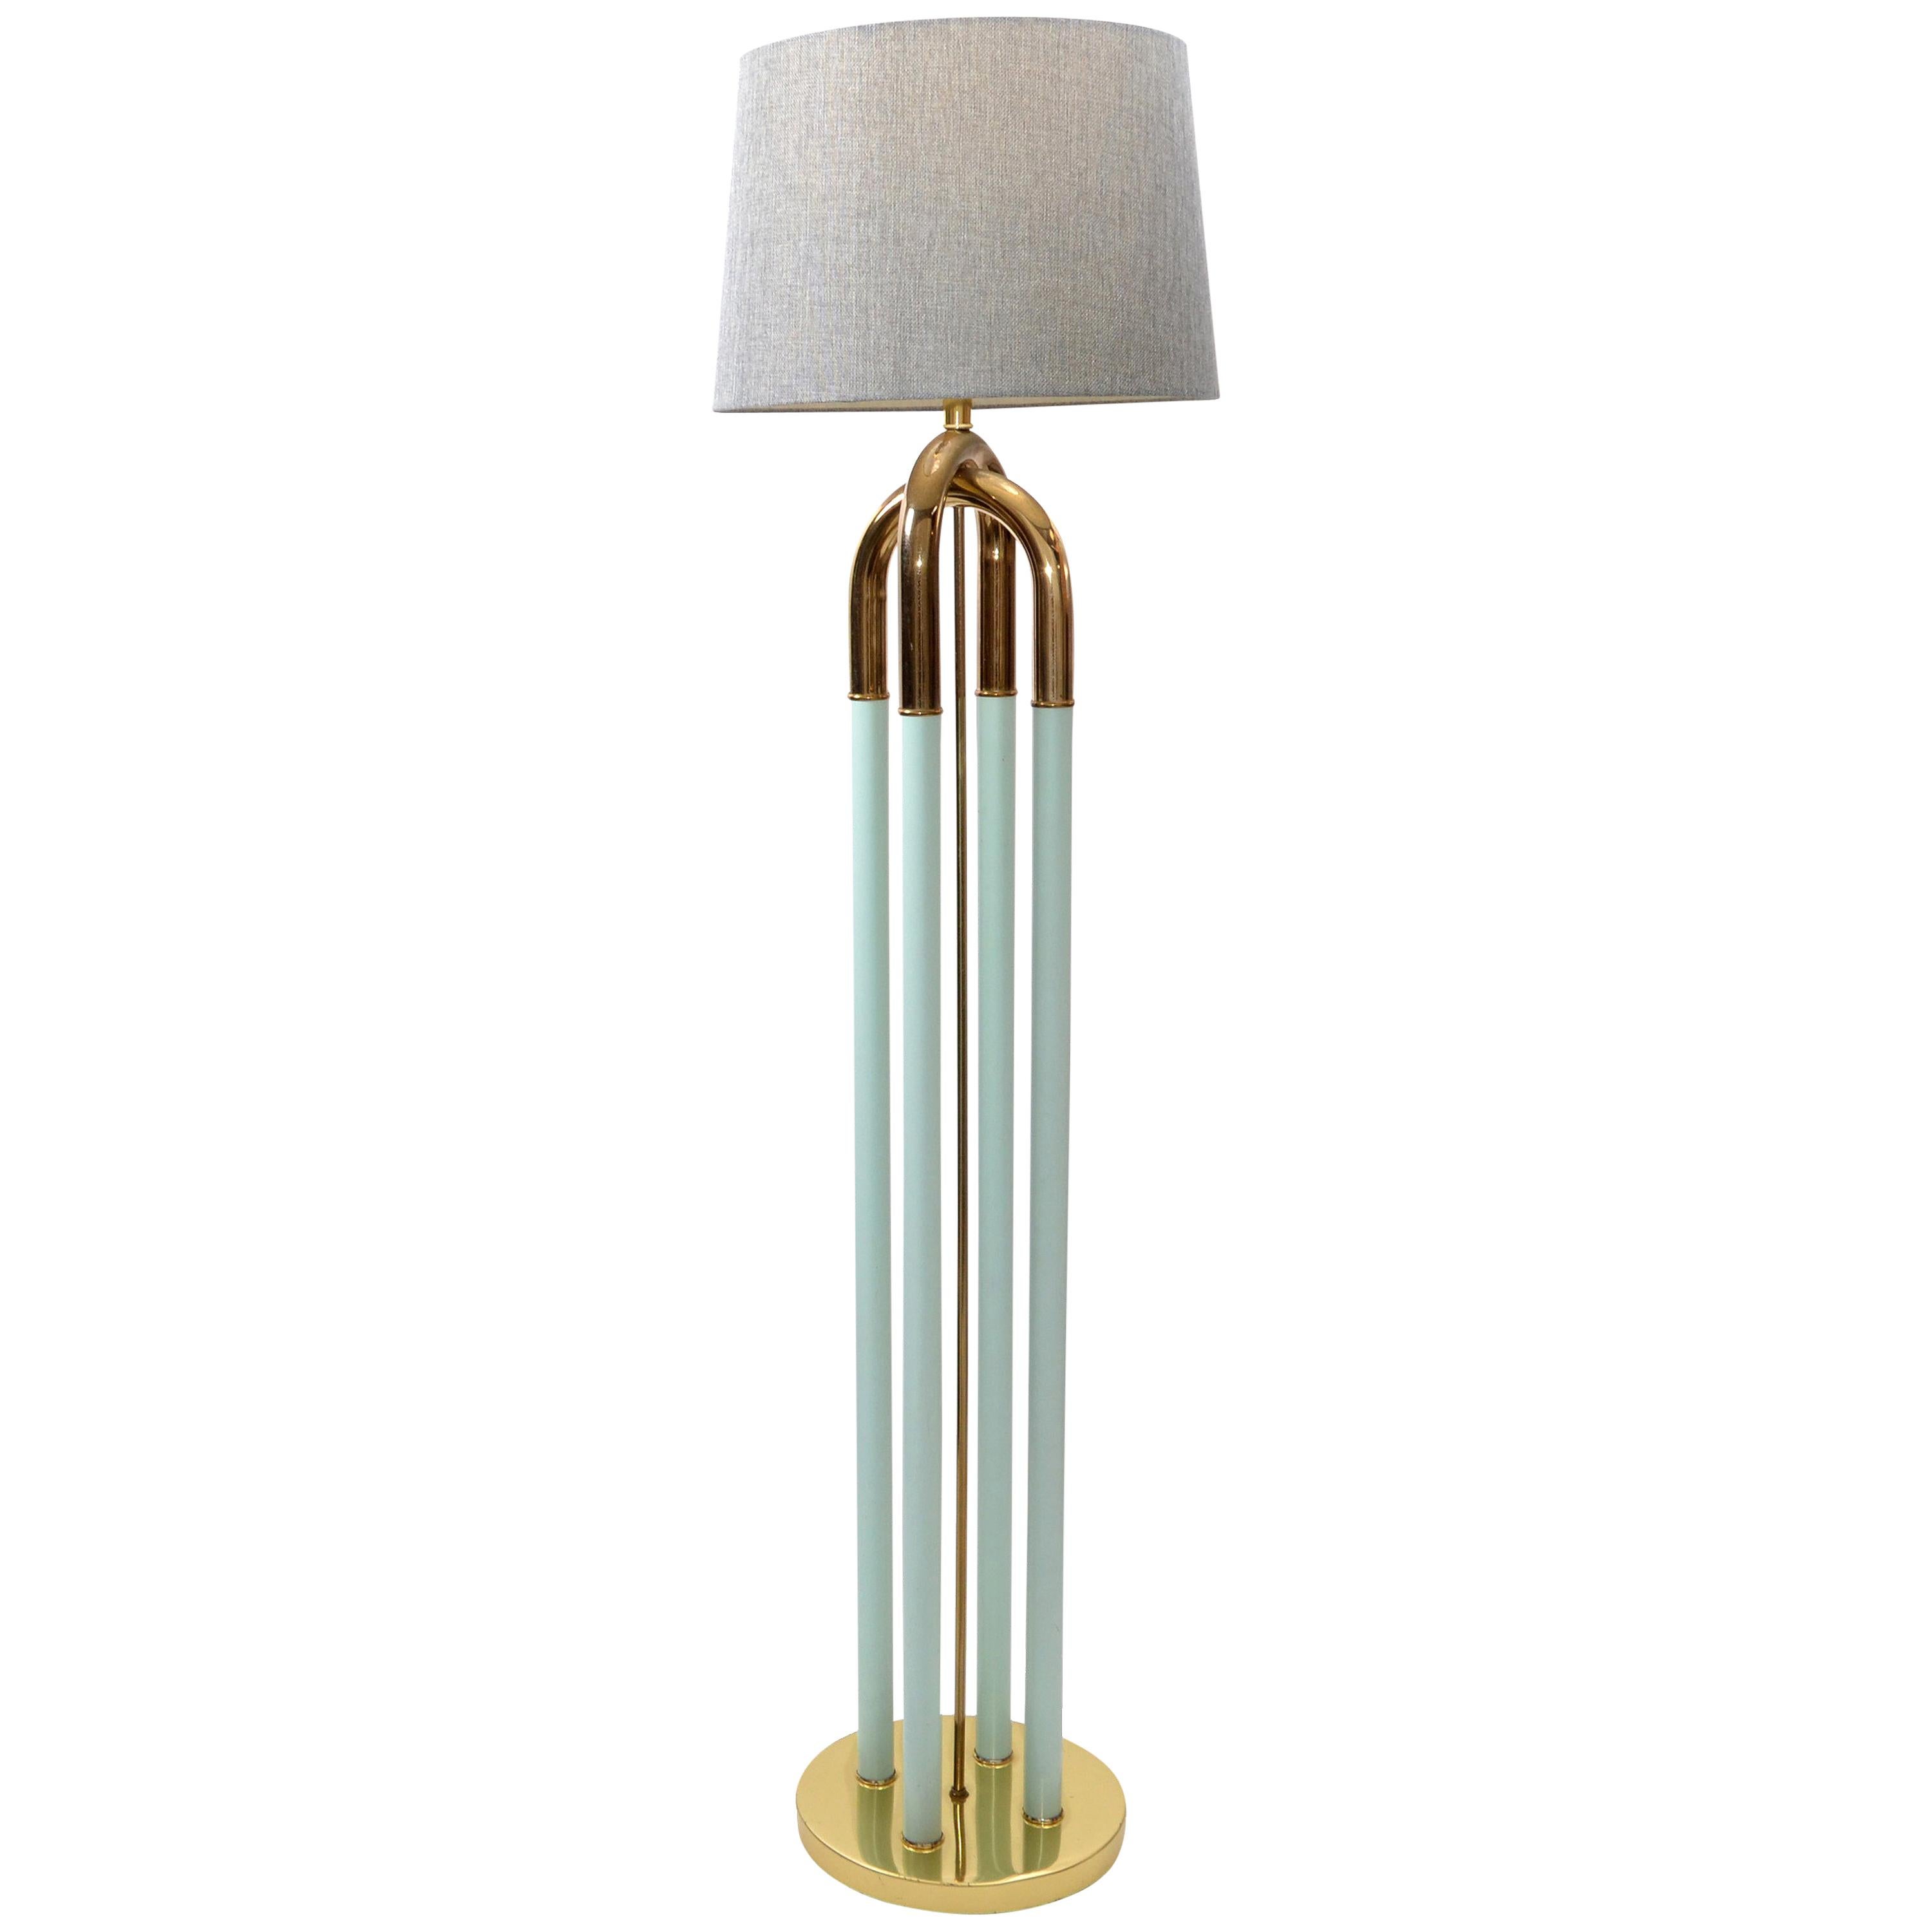 Mid-Century Modern Brass-Plated and Turquoise Enamel Finish Floor Lamp For Sale